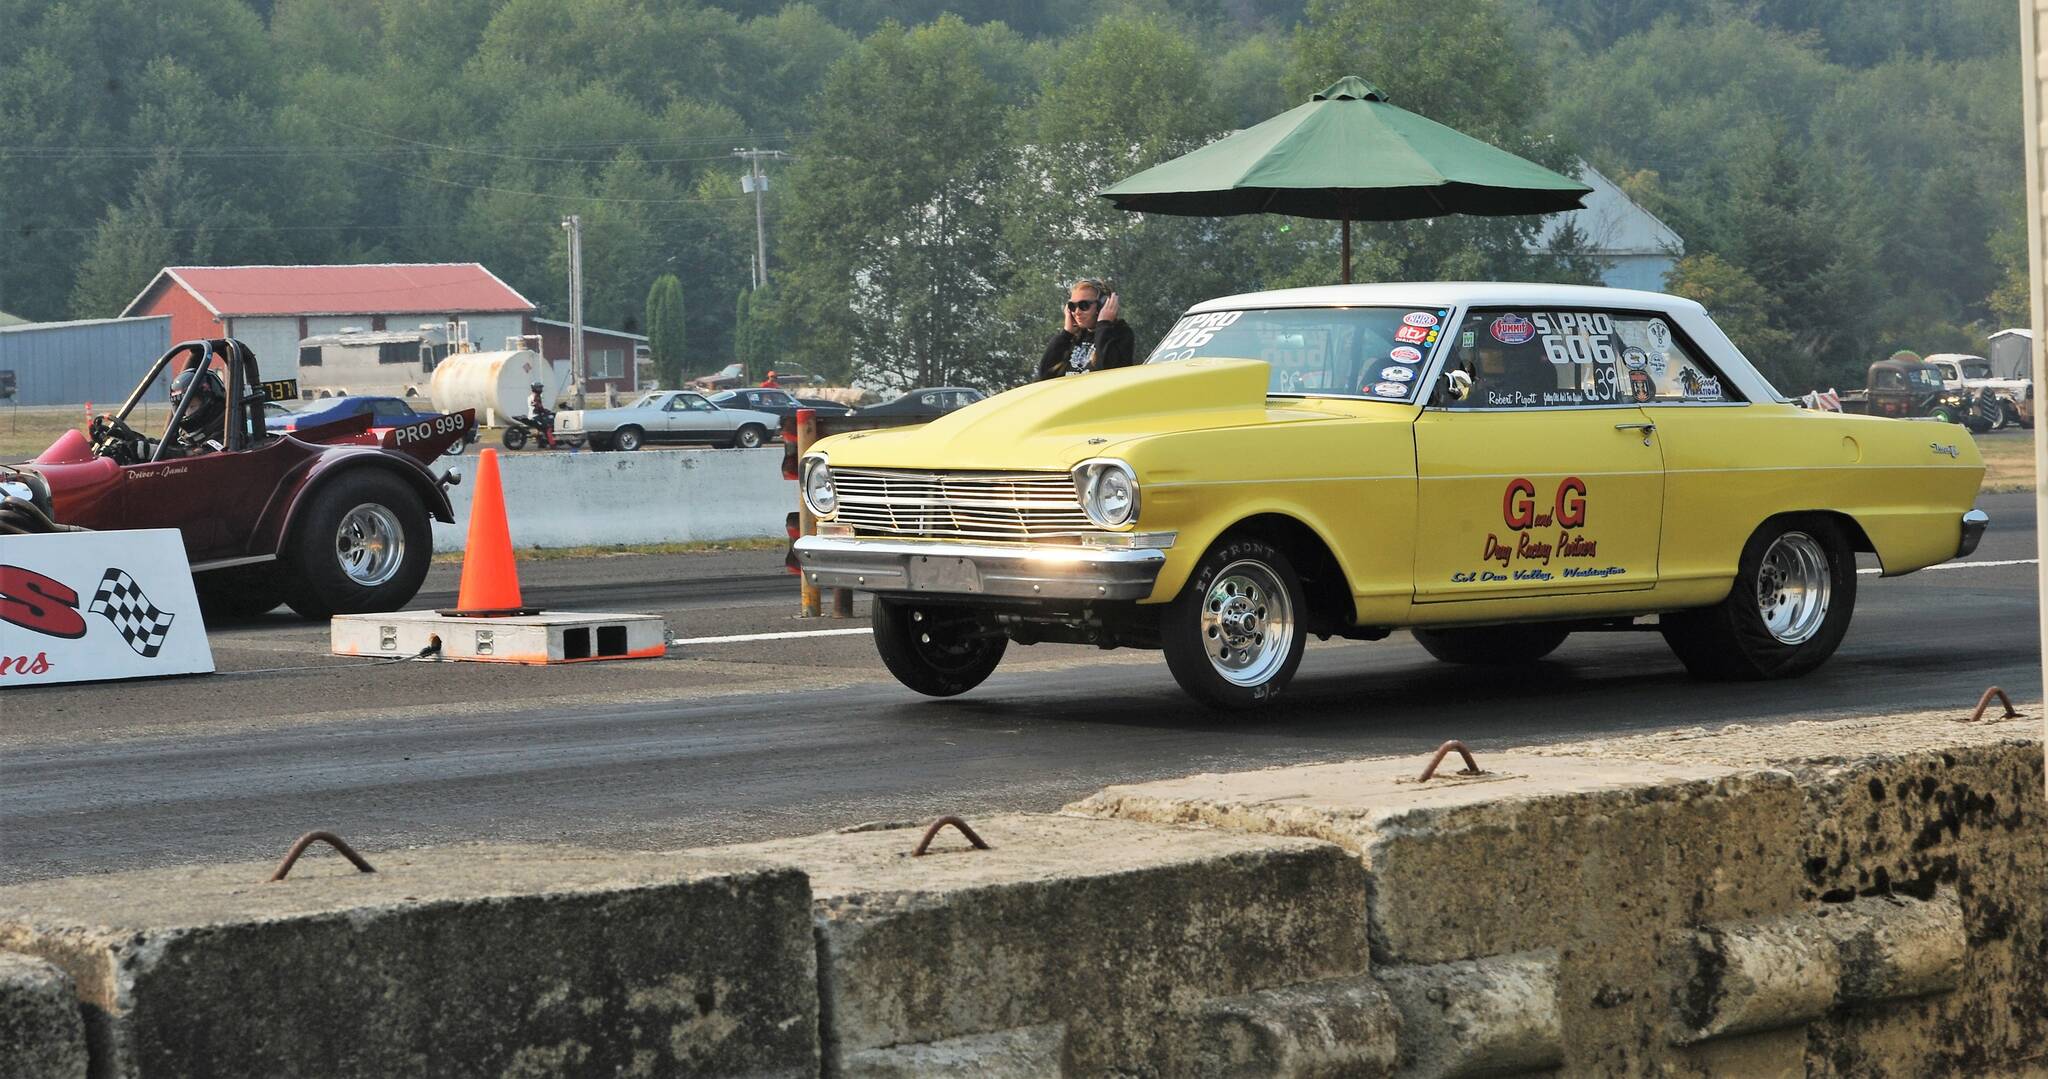 Robert Pigott of Beaver lifts off the starting line with his 62 Chevy. Photo by Lonnie Archibald